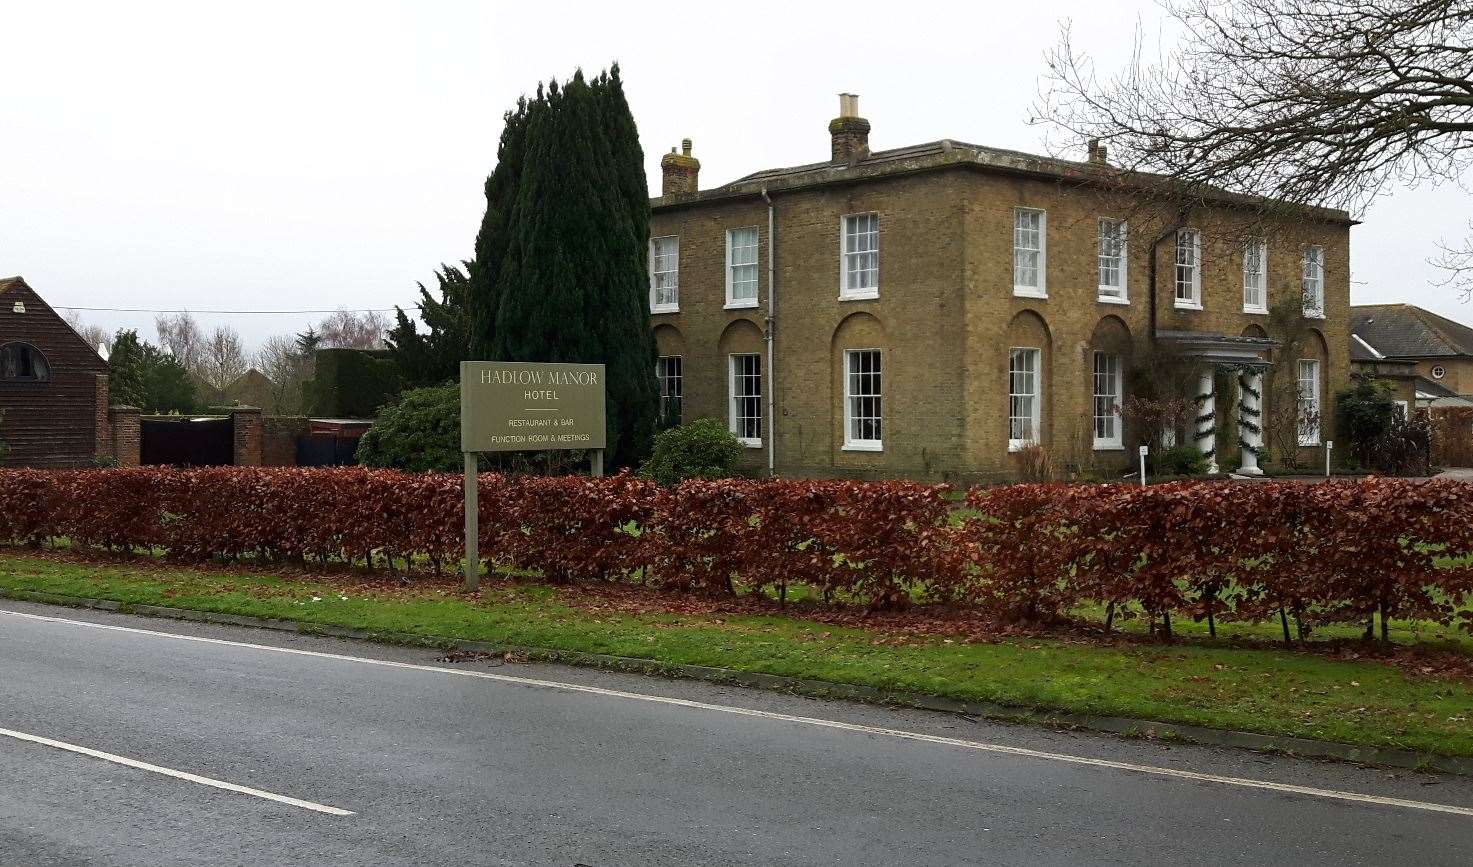 The Hadlow Manor Hotel was set to shut in September to be turned into flats, but is now closing seven months earlier